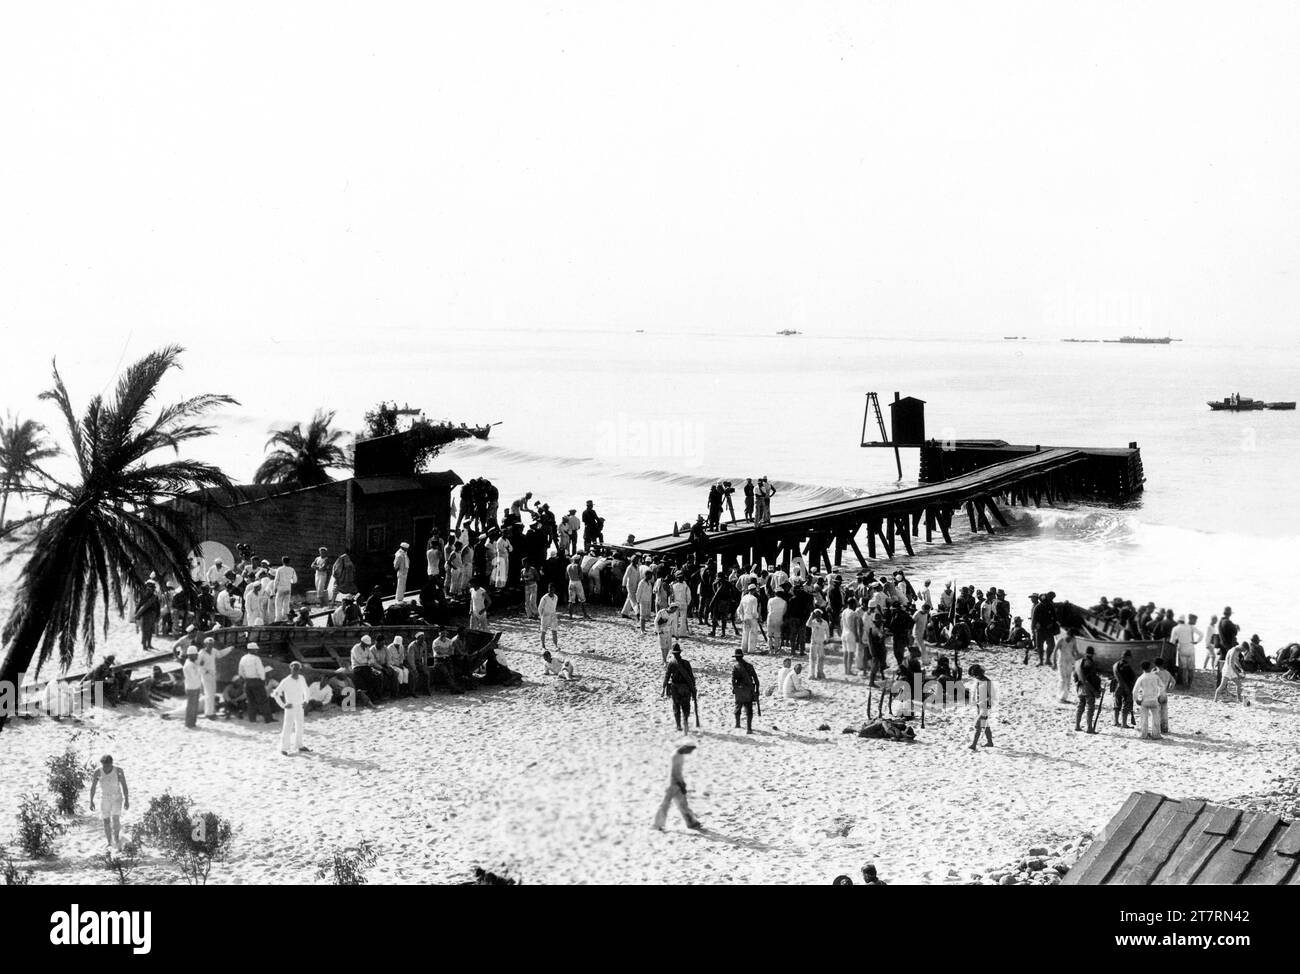 On set location candid filming the Landing at Daiquiri showing the first boatloads of Teddy Roosevelt's Rough Riders arriving on Cuban soil on set location candid at Laguna, California with Director VICTOR FLEMING standing on jetty in white shirt near movie camera during filming of THE ROUGH RIDERS 1927 director VICTOR FLEMING assistant director Henry Hathaway cinematographers James Wong Howe and E. Burton Steene associate producer B.P. Schulberg producer Lucien Hubbard Paramount Pictures Stock Photo